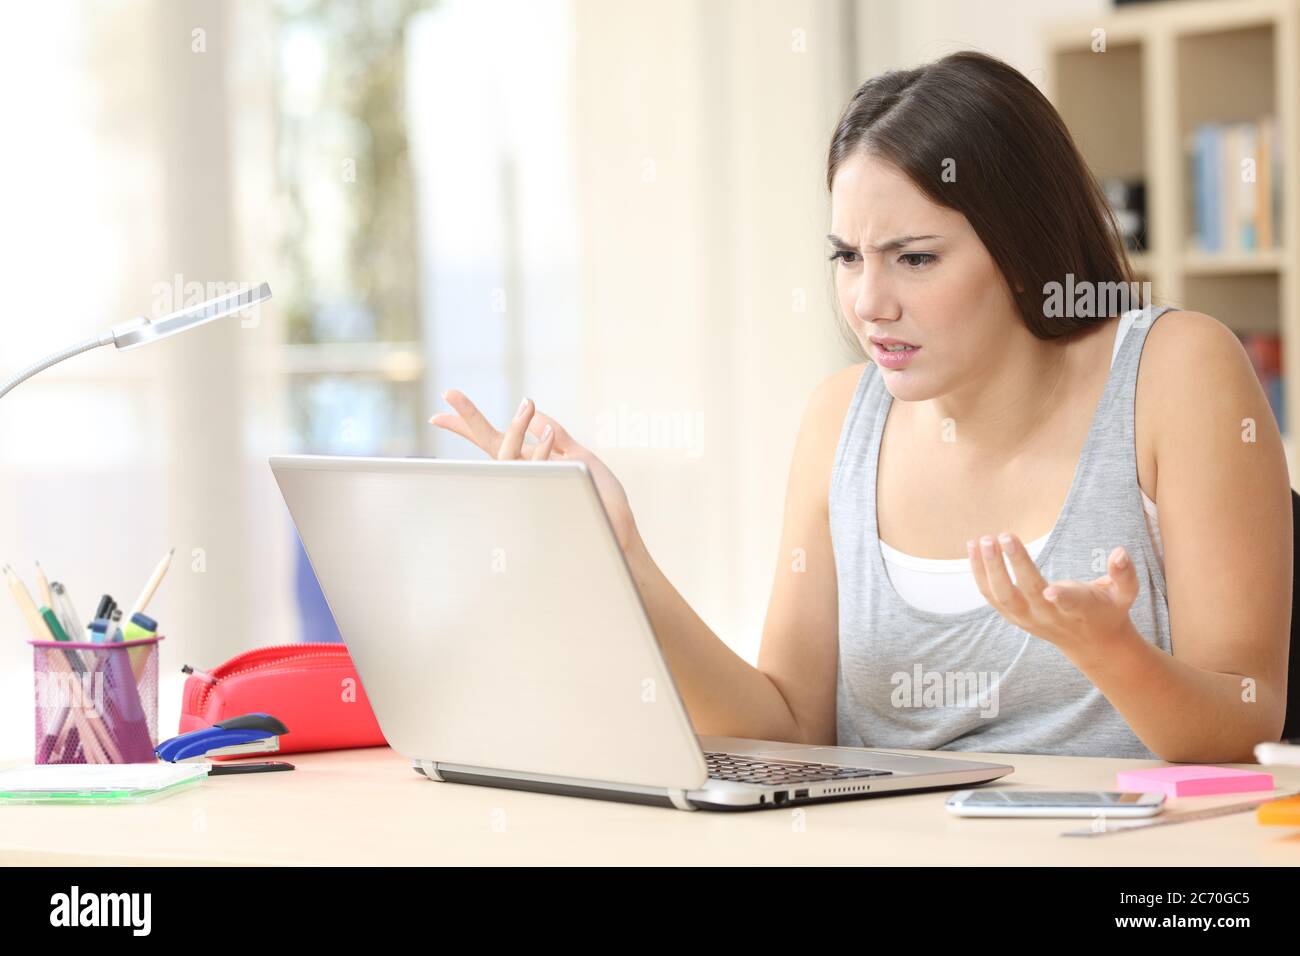 Angry student woman looking annoyed at laptop sitting on a desk at home Stock Photo